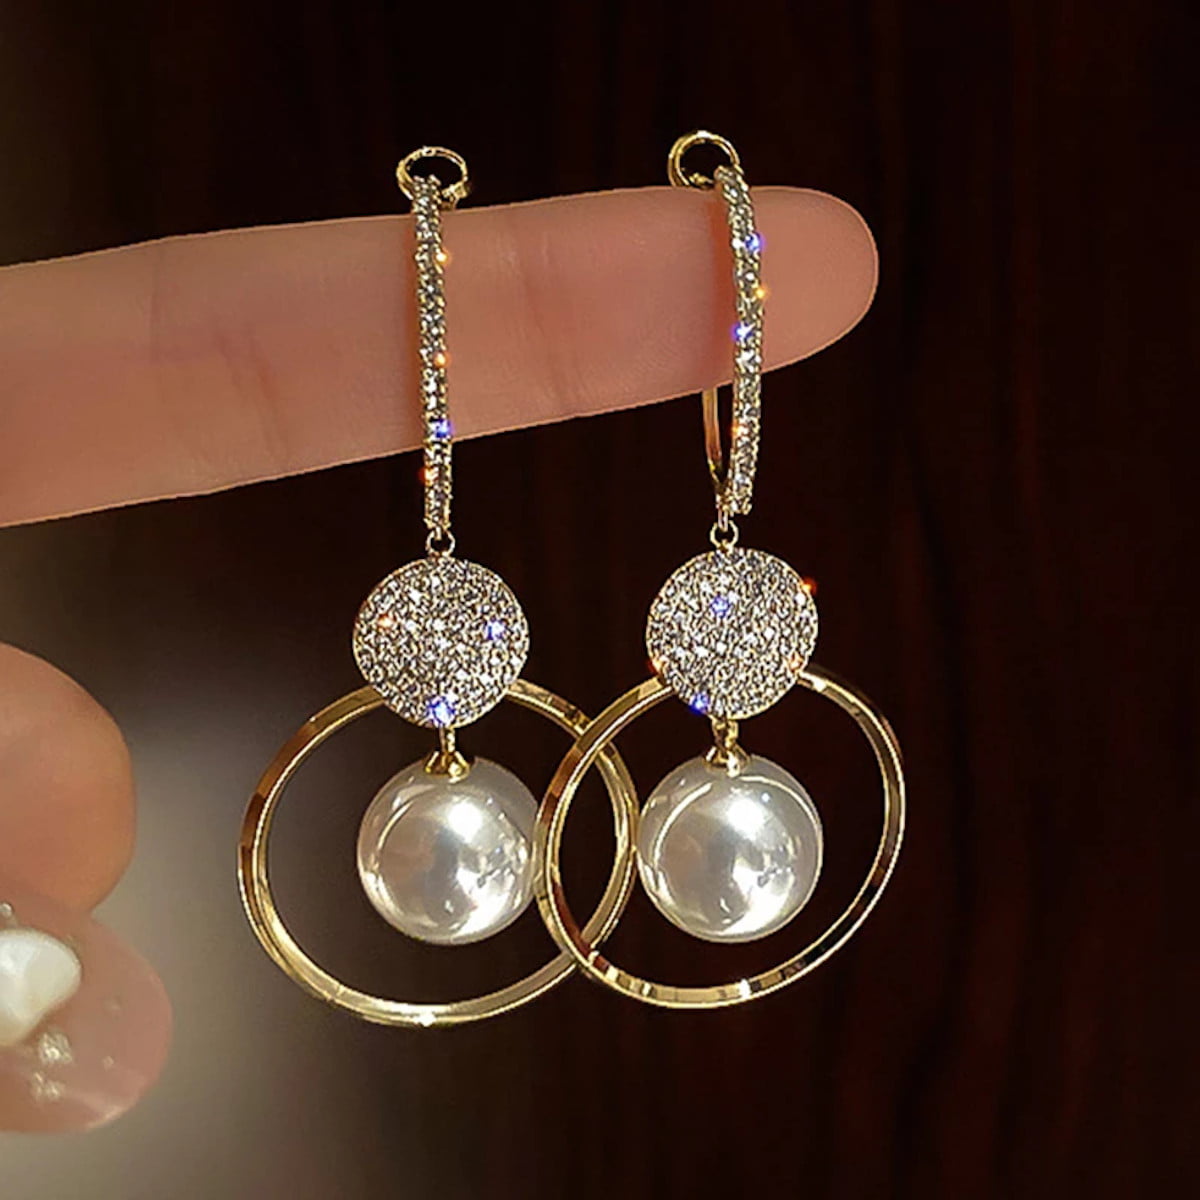 Earrings with gold on silver pendants and facet cut glass stones in gilded frame and freshwater pearl